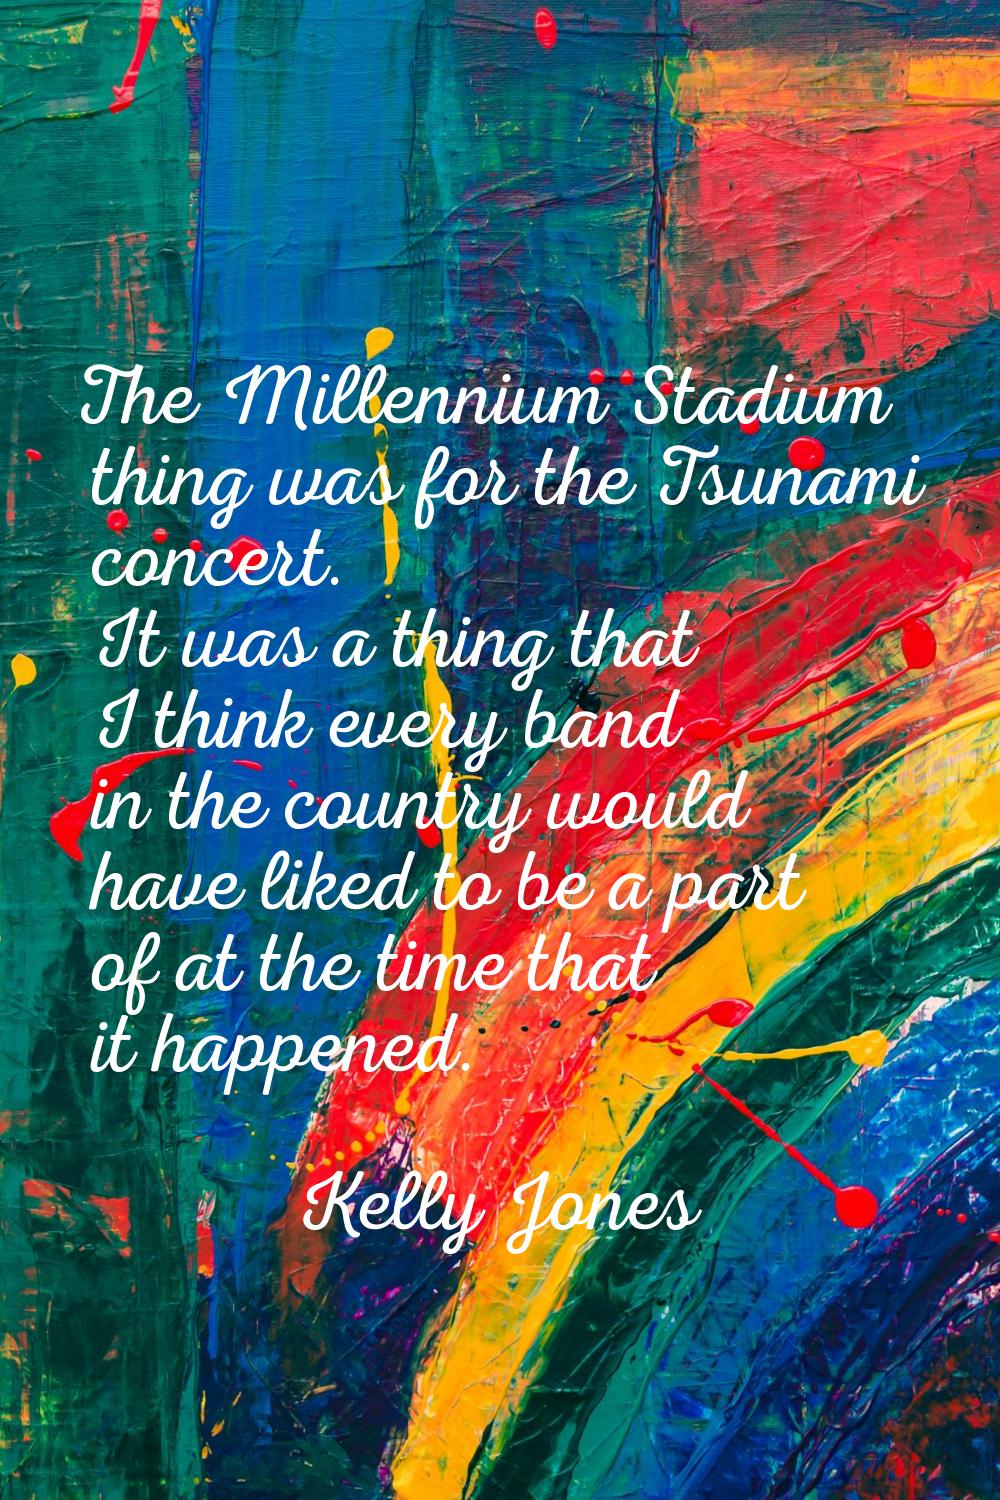 The Millennium Stadium thing was for the Tsunami concert. It was a thing that I think every band in